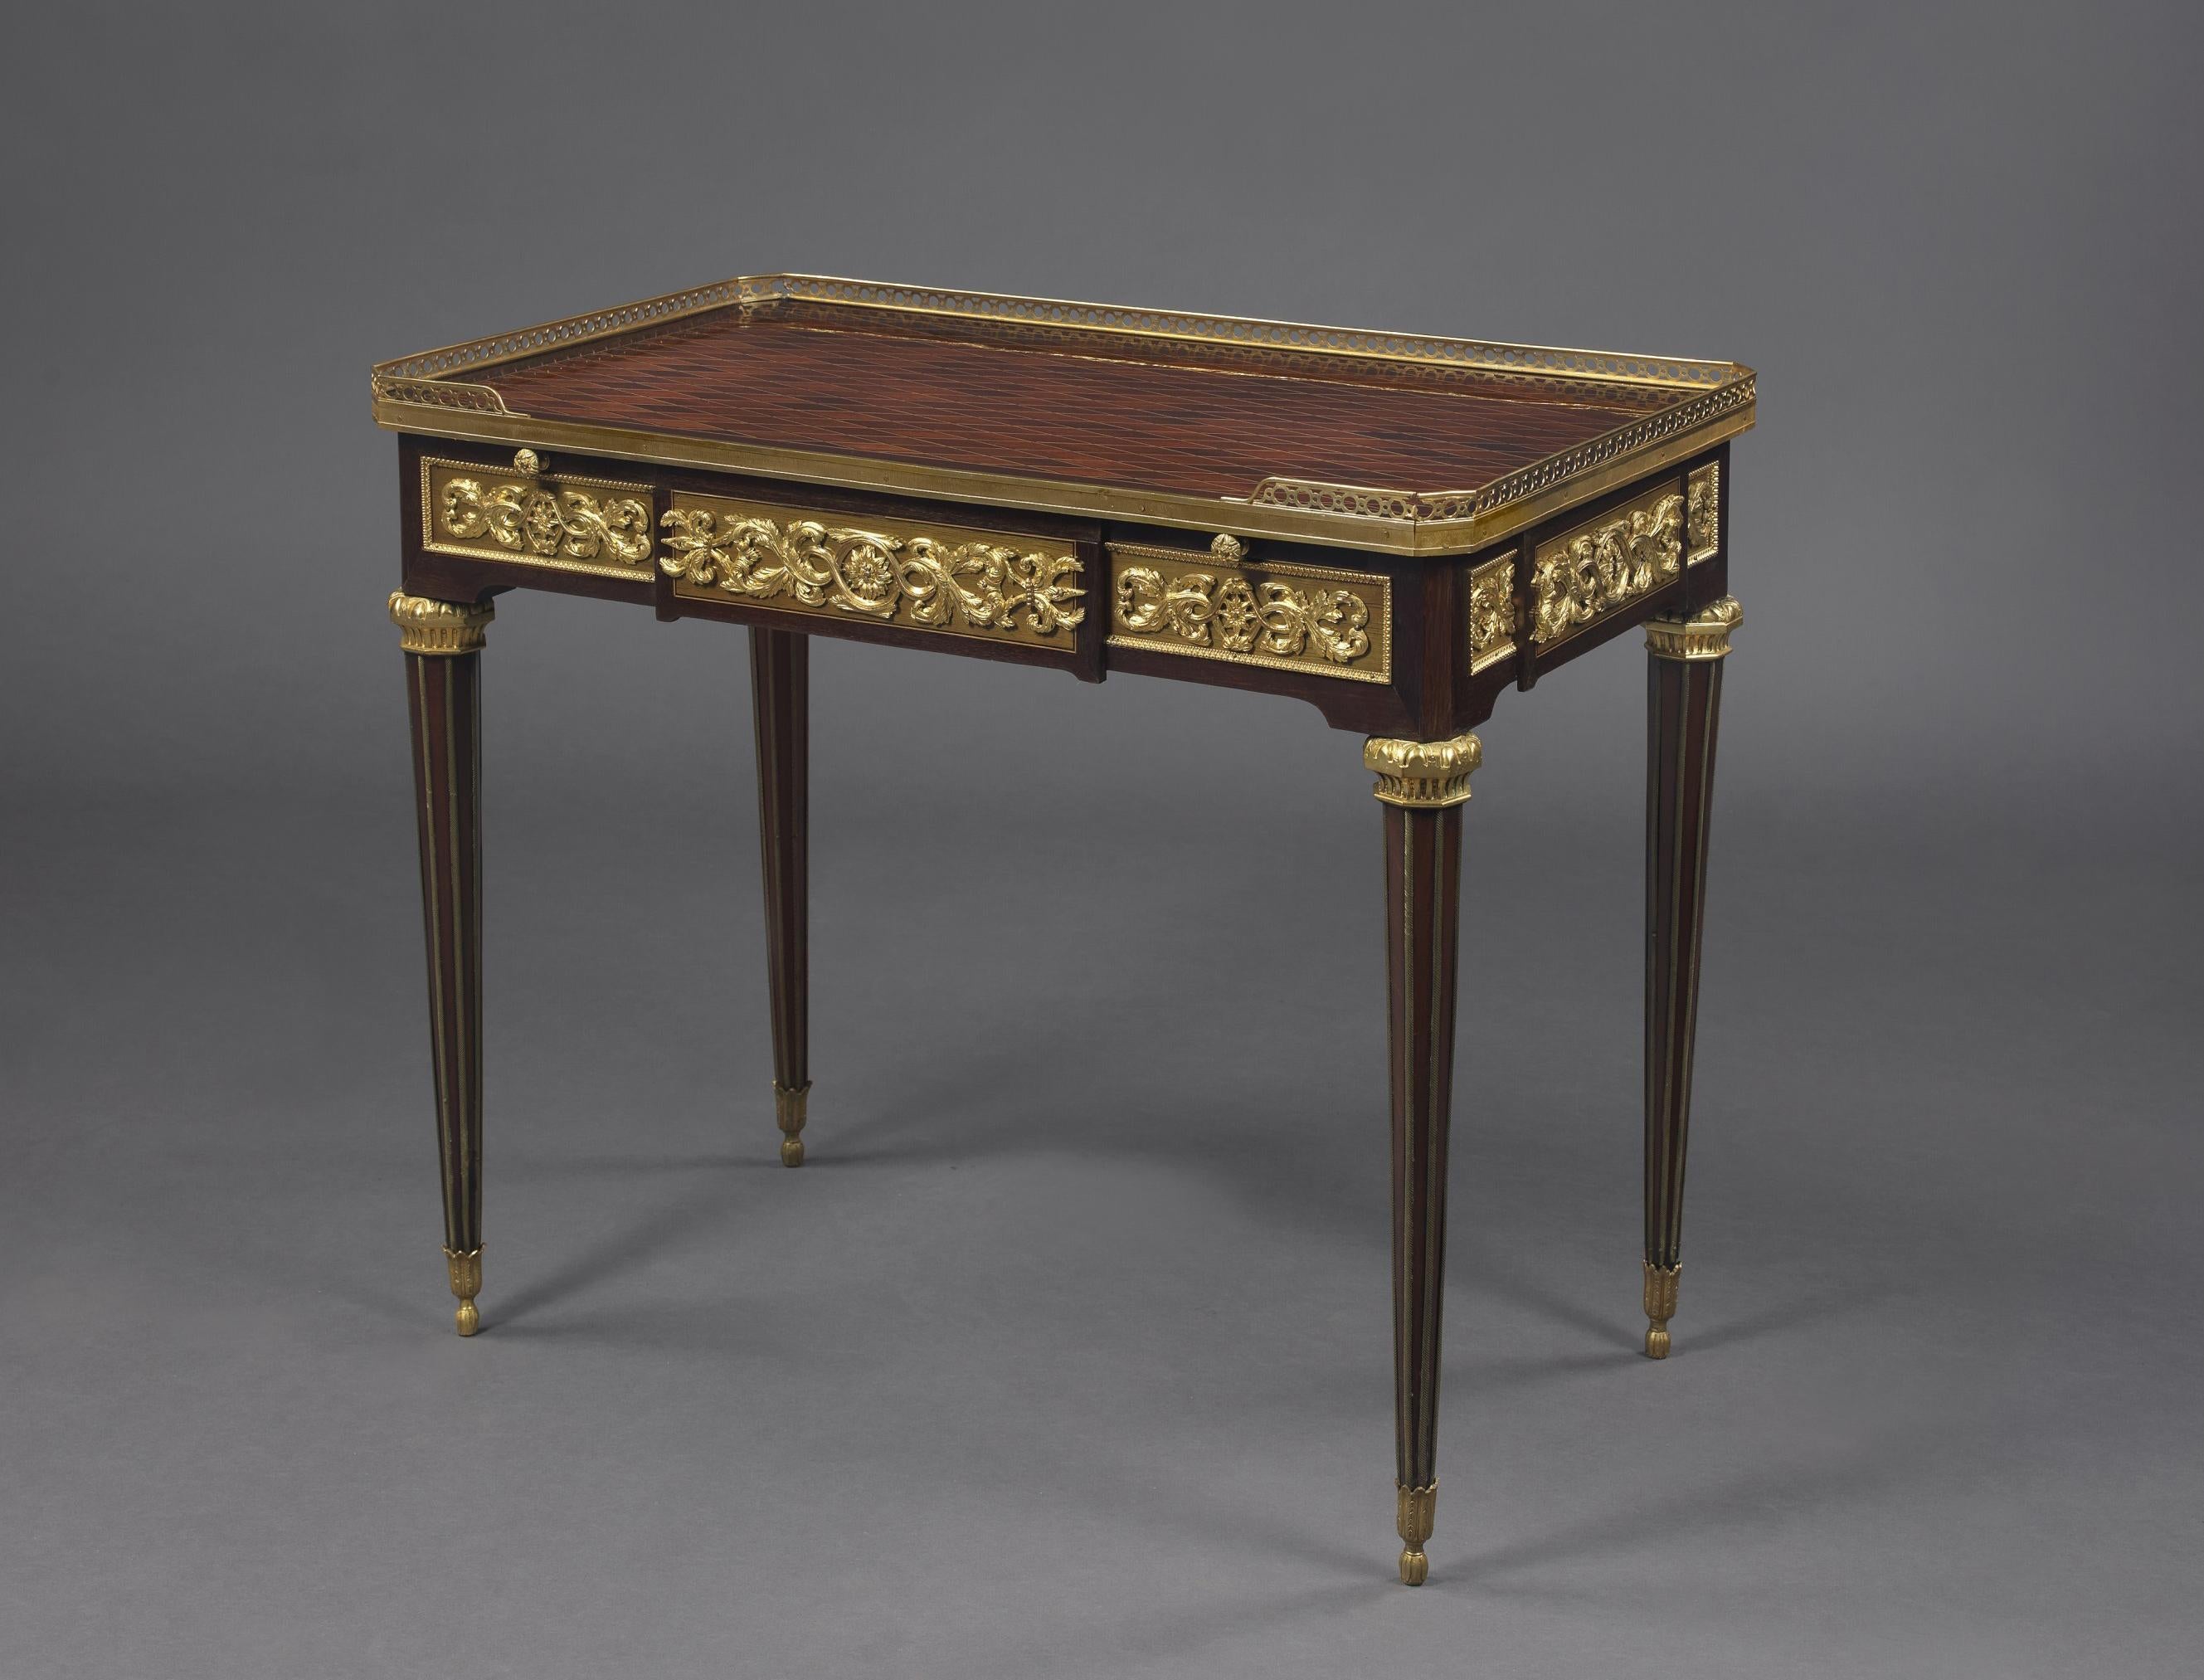 A Louis XVI style mahogany gilt bronze centre table after The Model by Jean-Henri Riesener by Paul Sormani.

French, circa 1890. 

Stamped 'Paul Sormani 10 rue Charlot à Paris'.

This fine mahogany centre table has a lattice parquetry top with